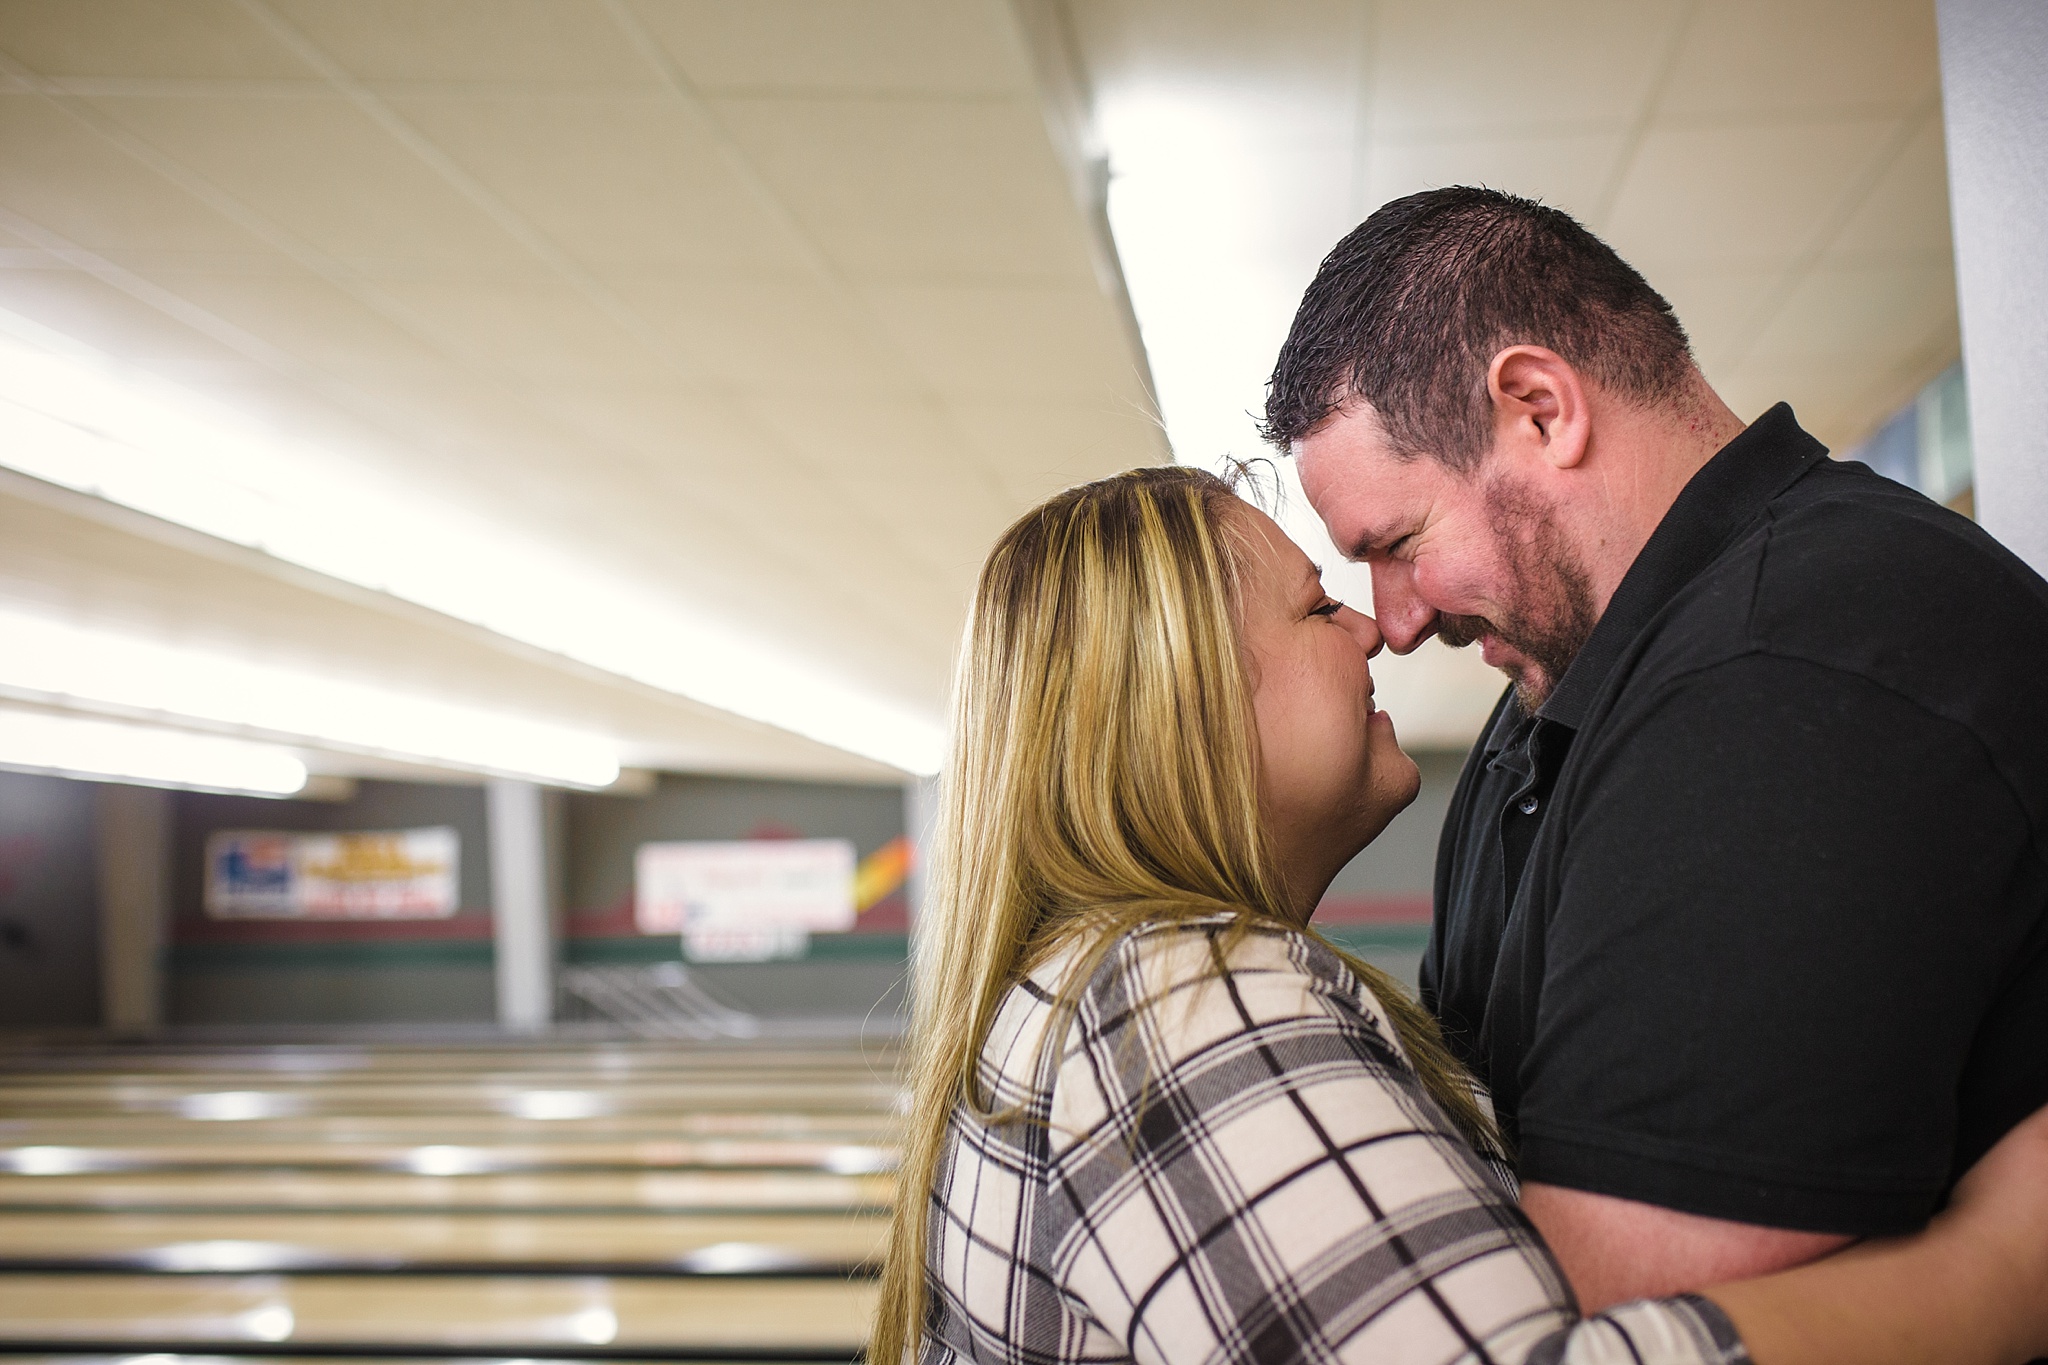 Couple embracing during their bowling alley engagement session. Briana & Kevin’s Devil’s Backbone and Sweetheart Lanes Engagement Session by Colorado Engagement Photographer, Jennifer Garza. Devil's Backbone Engagement, Devil's Backbone Engagement Session, Loveland Engagement Session, Colorado Engagement Photography, Colorado Engagement Photos, Sweetheart Lanes Bowling Alley, Bowling Alley Engagement, Bowling Engagement Session, Bowling Engagement Photography, Wedding Inspo, Colorado Wedding, Colorado Bride, Brides of Colorado, Bride to Be, Couples Goals